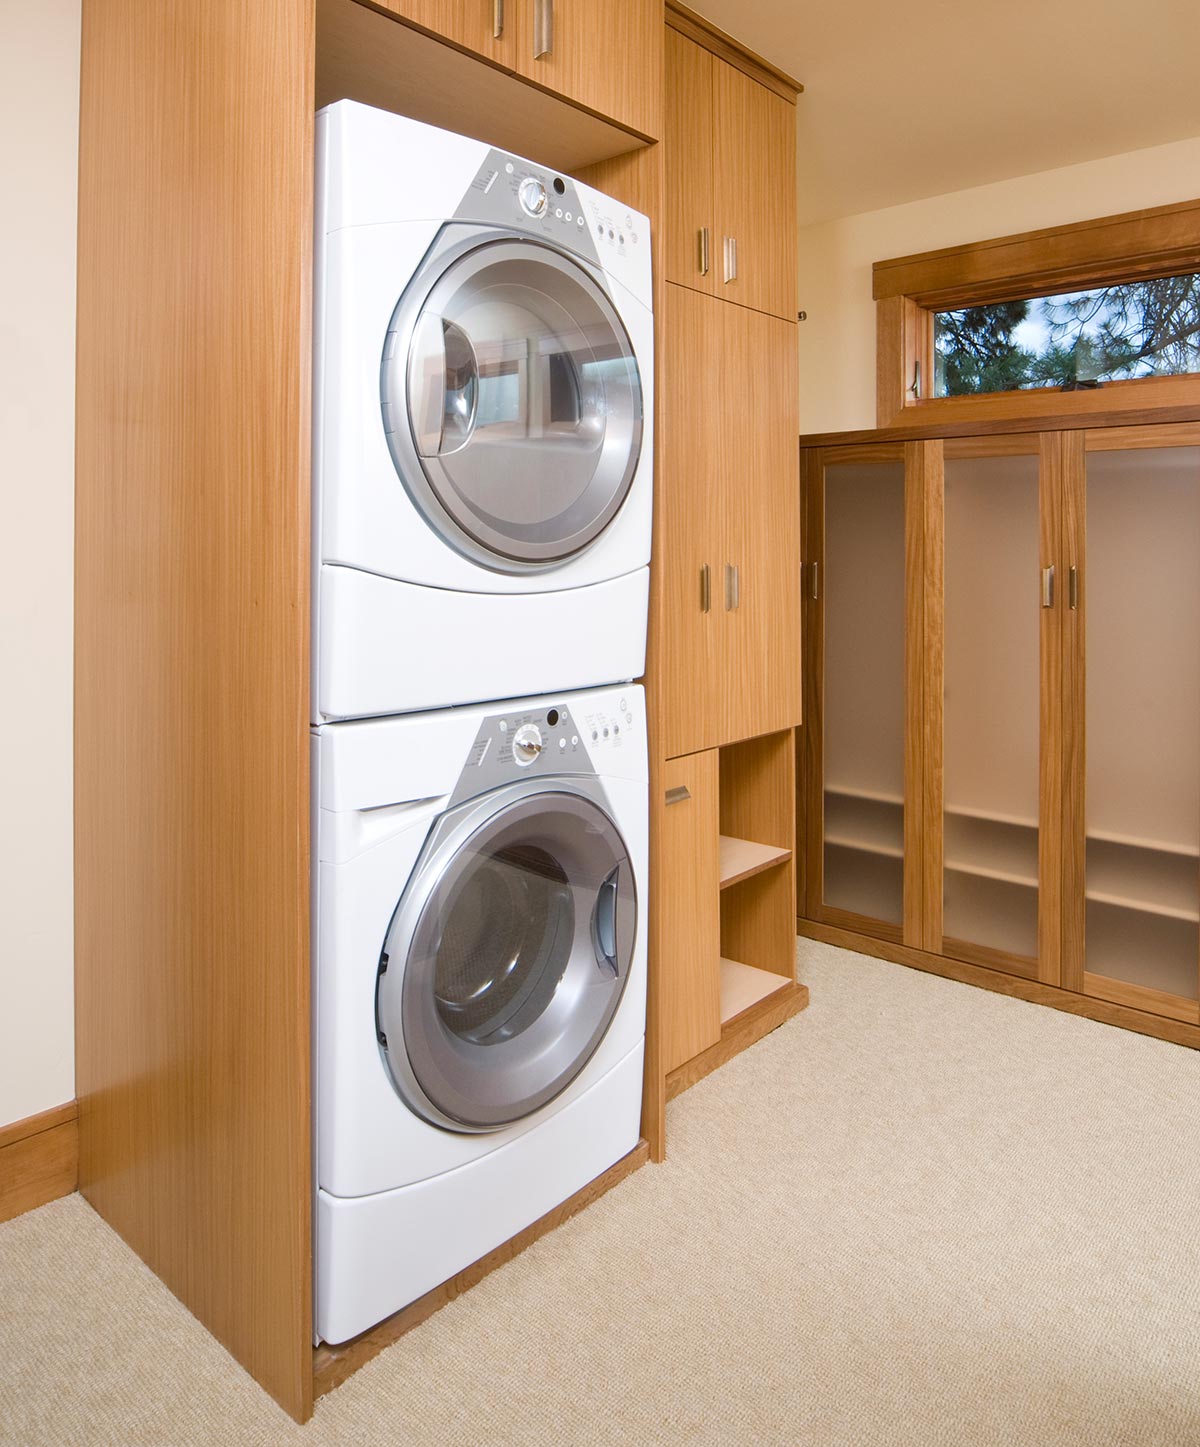 washer and dryer as amenities in rented properties